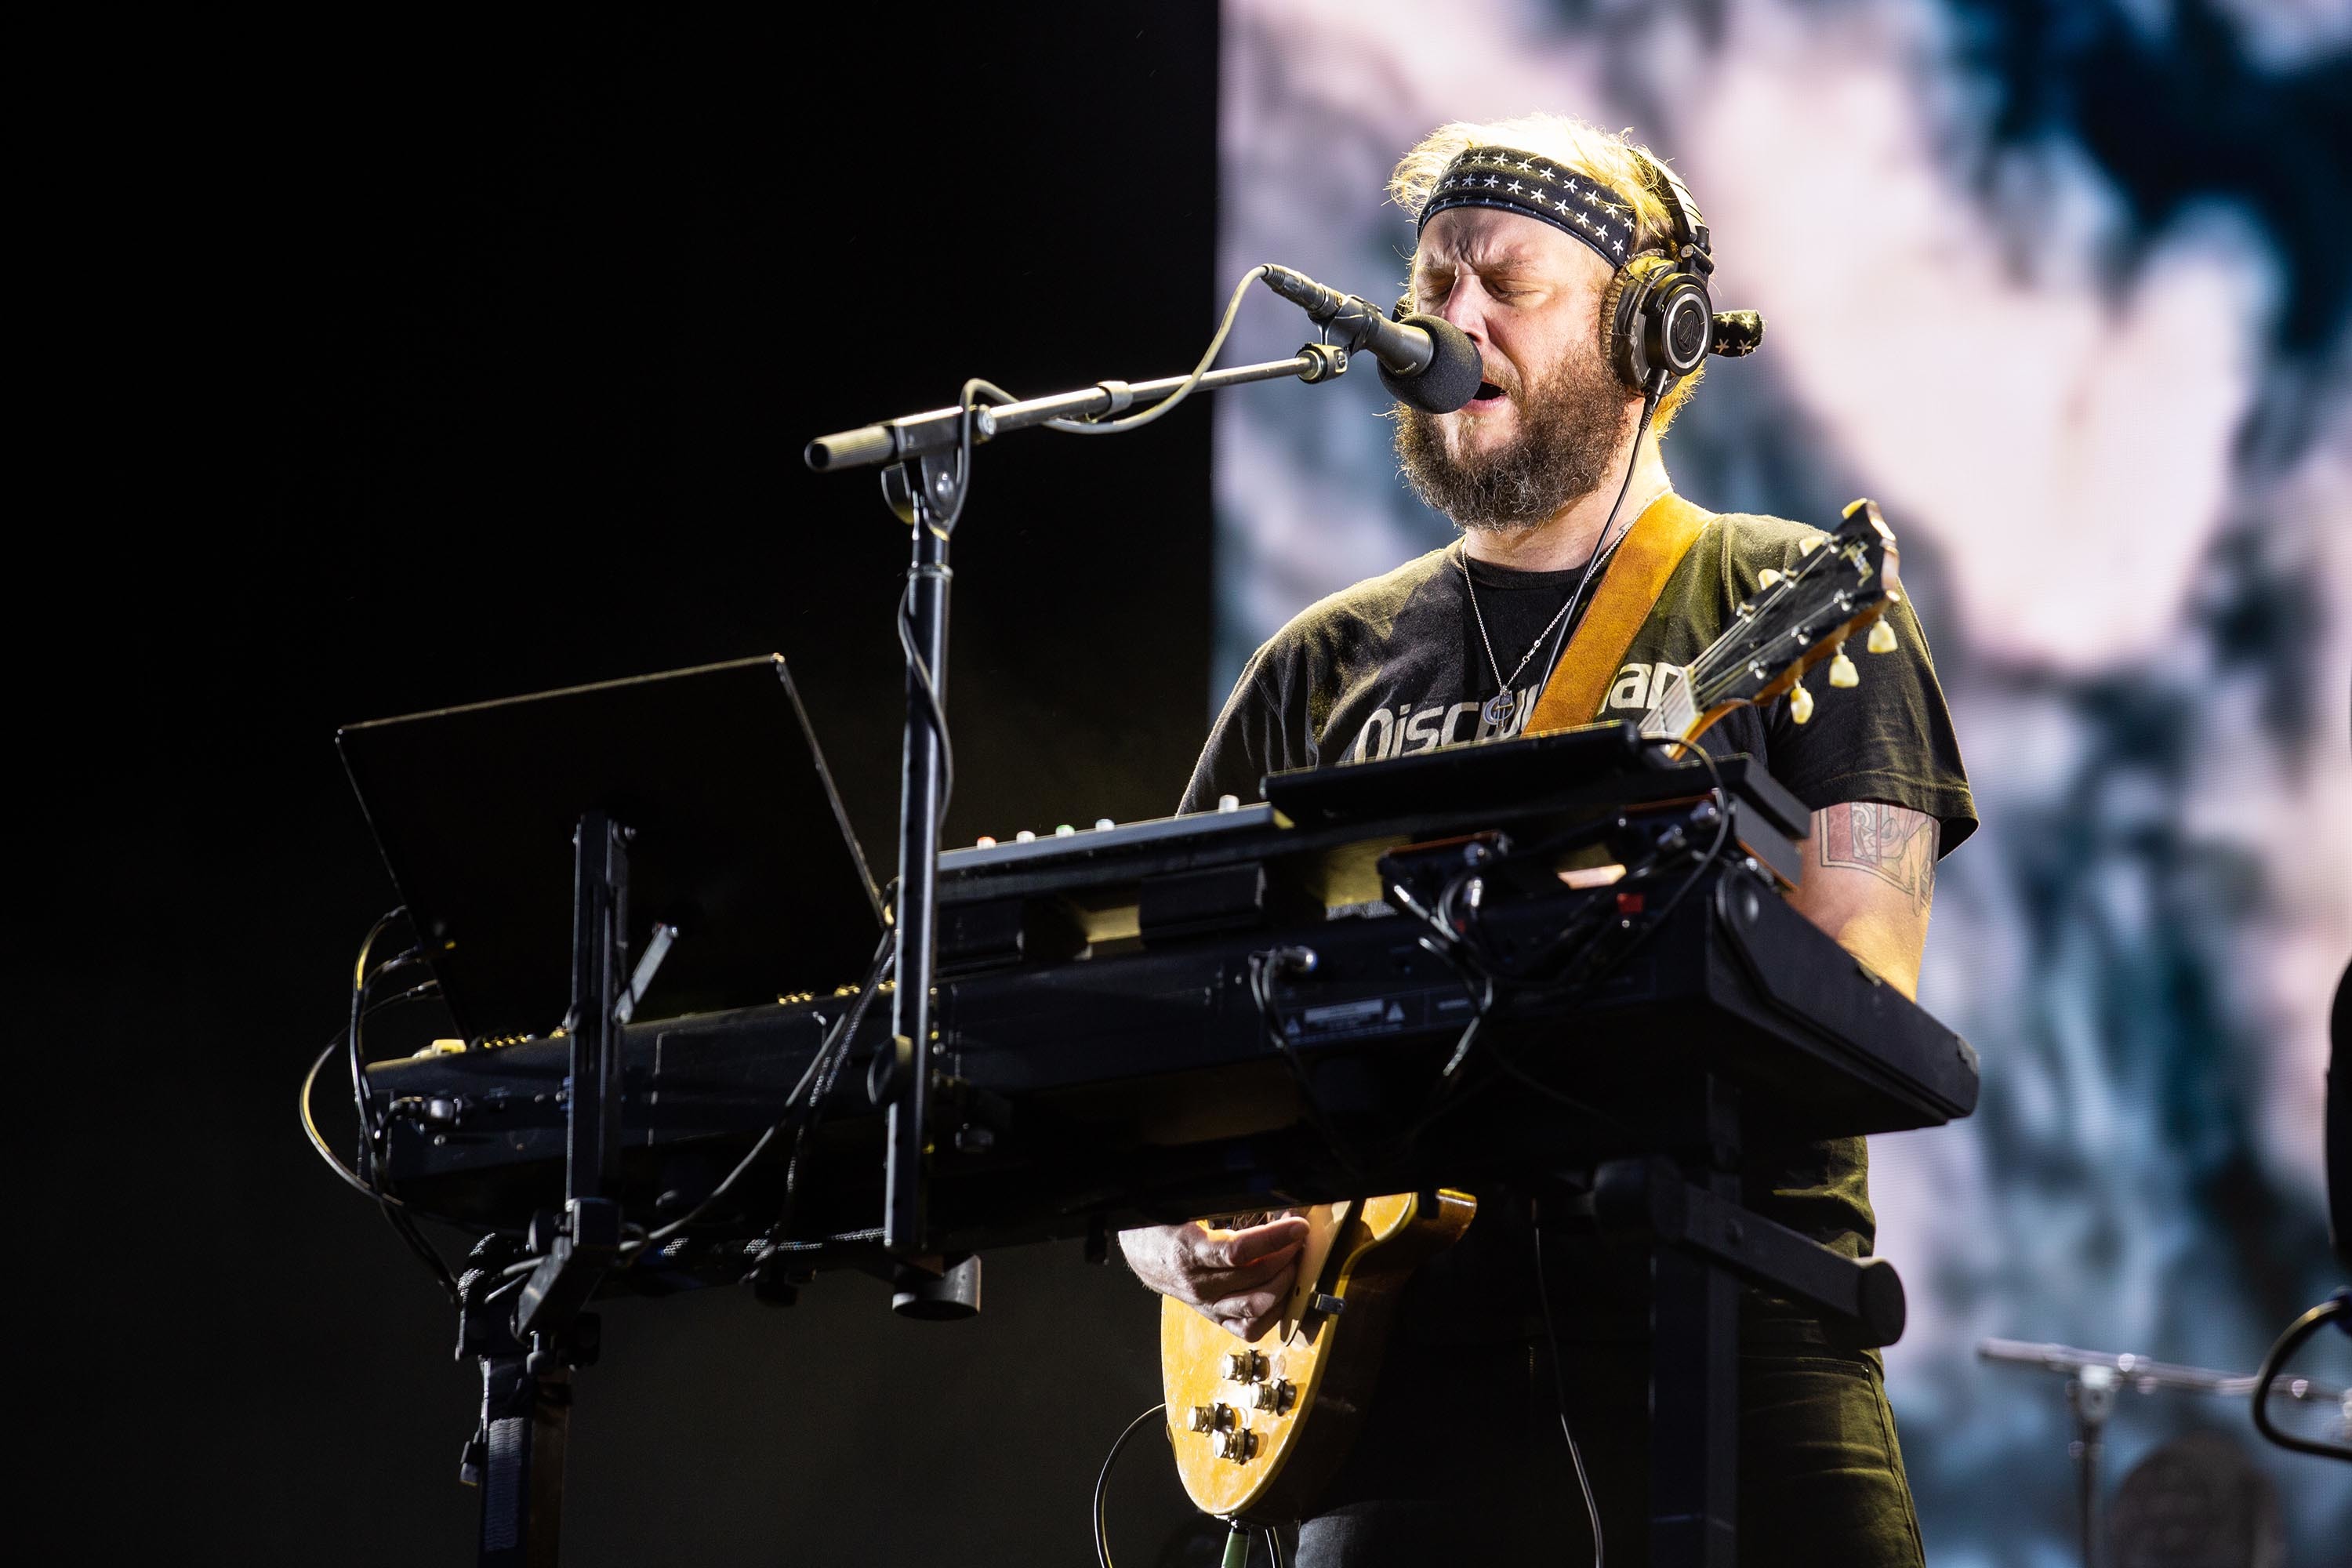 Bon Iver [CANCELLED] at Stage AE